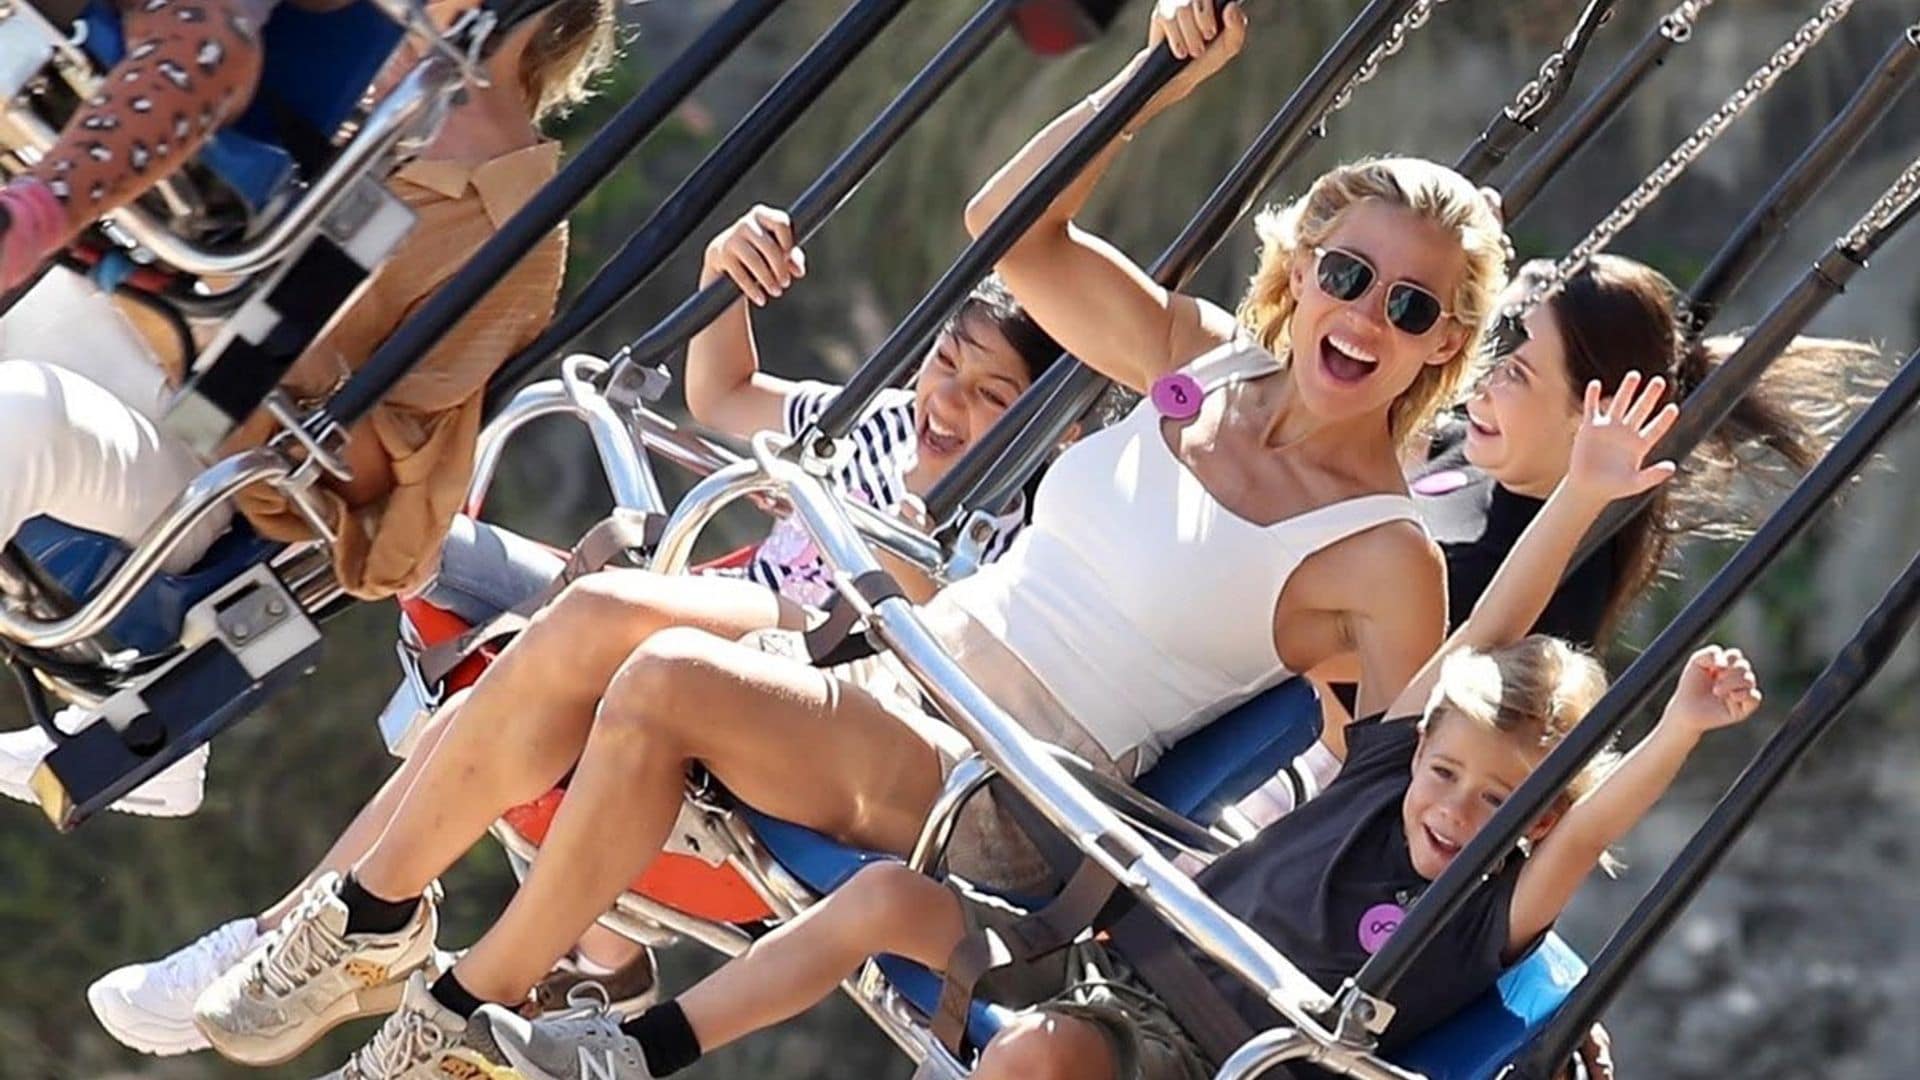 Elsa Pataky enjoys a day with her kids at Luna Park in Sydney, Australia